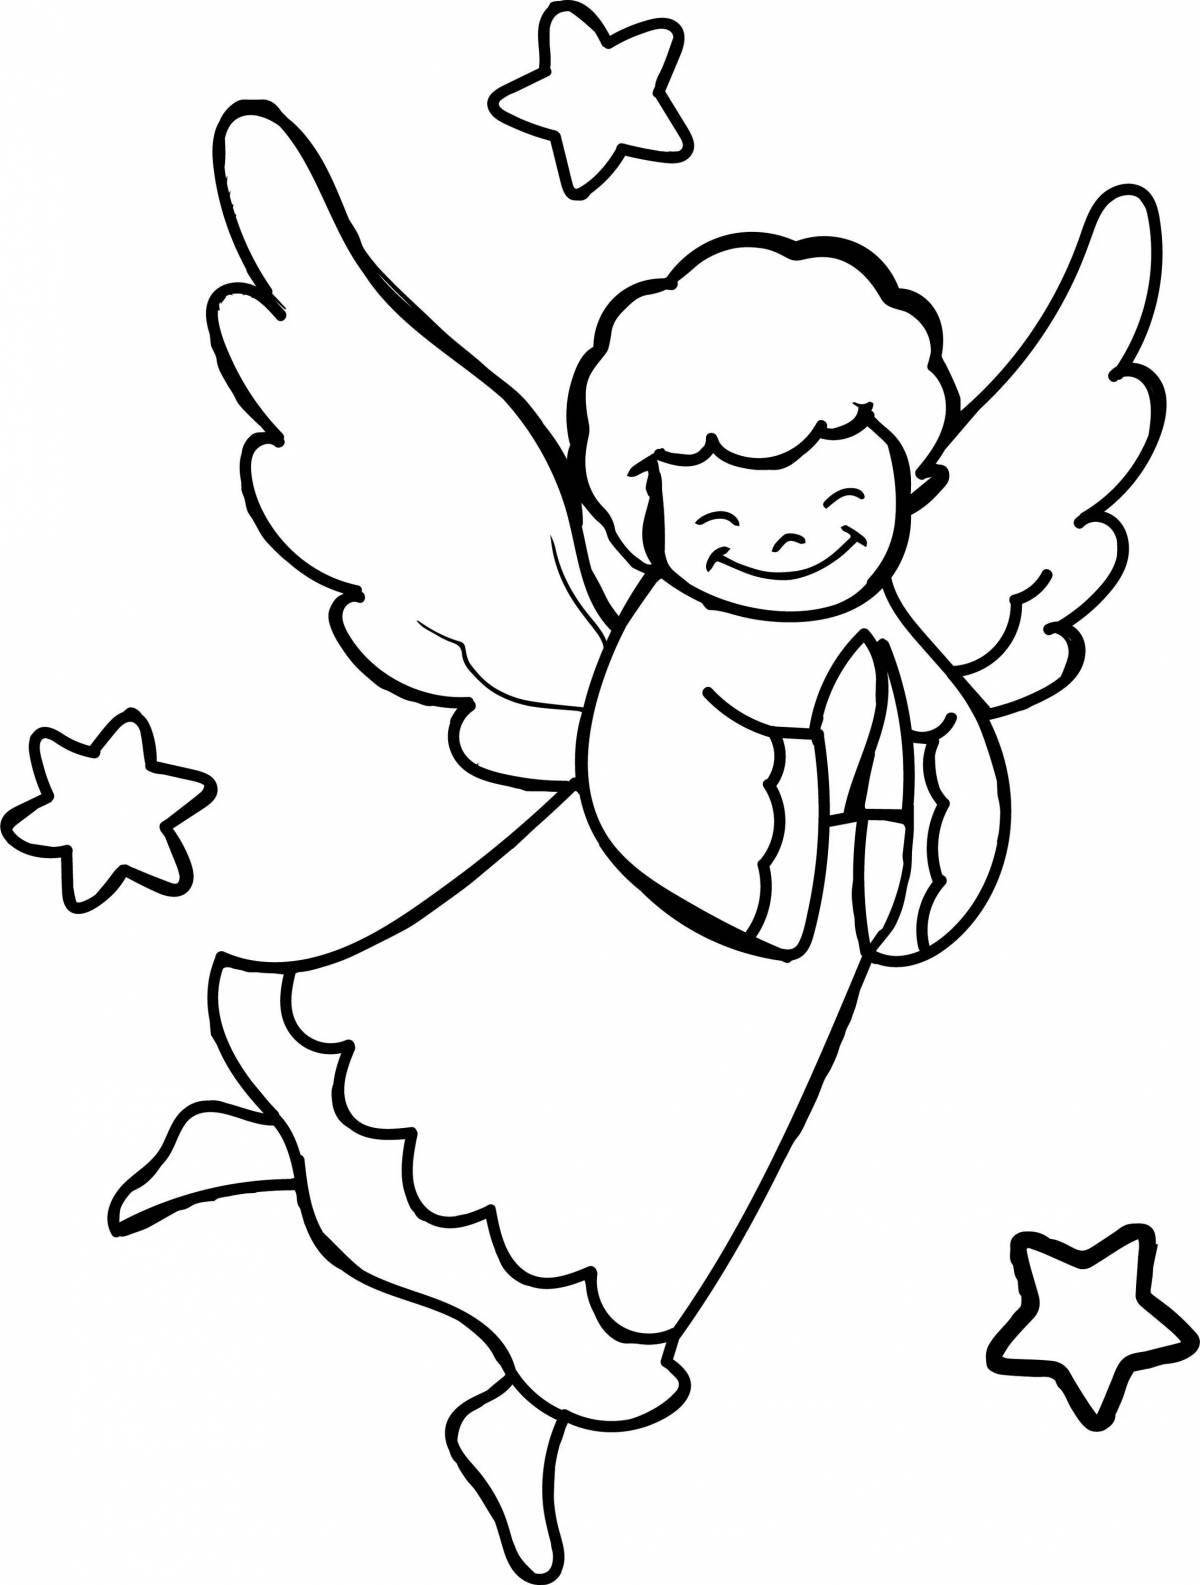 Exalted angel coloring book